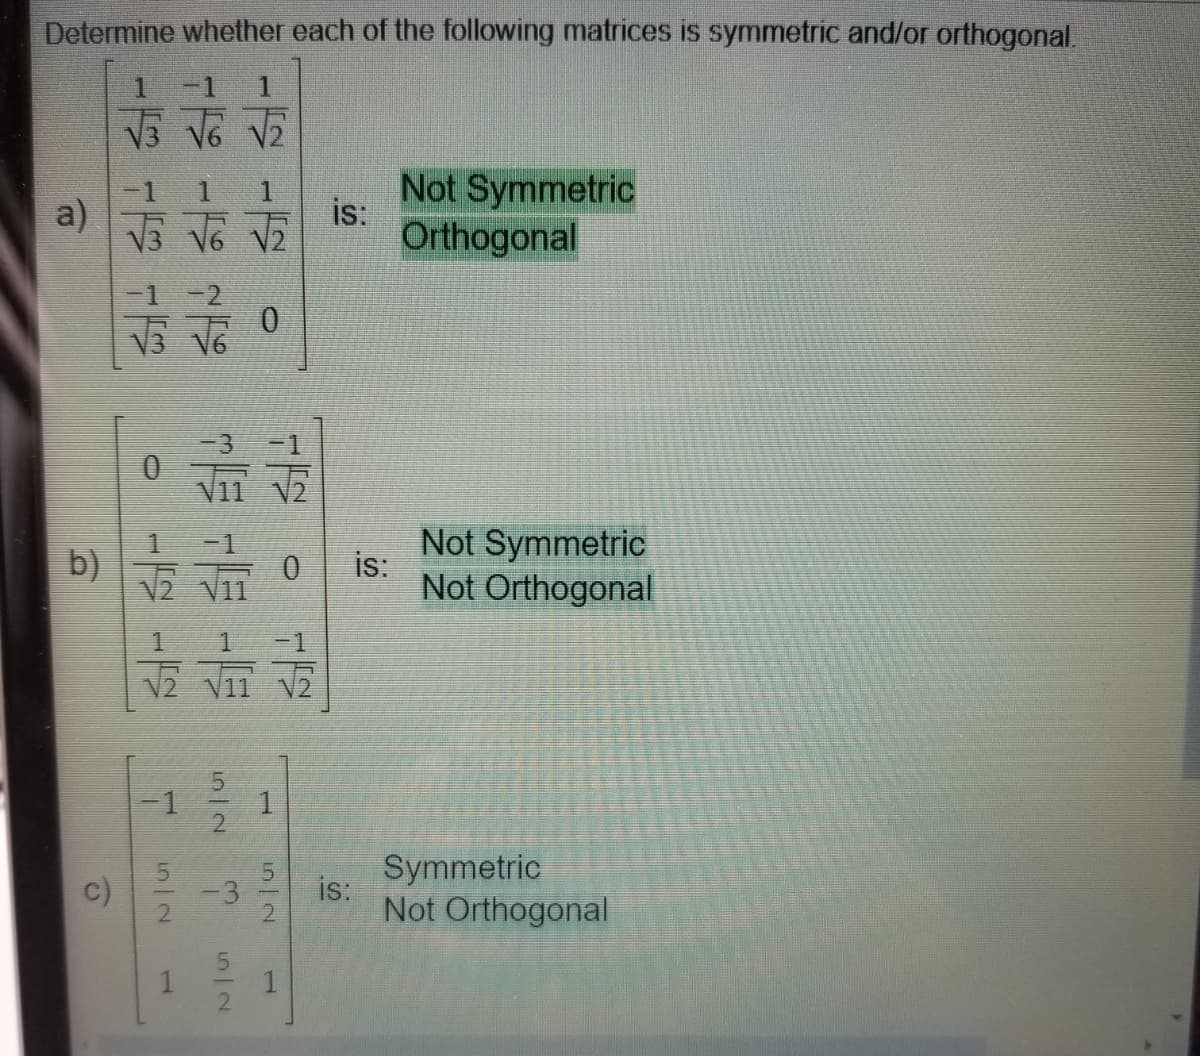 Determine whether each of the following matrices is symmetric and/or orthogonal.
1.
-1
V3 V6 V2
Not Symmetric
is:
a)
Orthogonal
Not Symmetric
is:
Not Orthogonal
-D1
b)
1.
-D1
V2 V11 V2
-1
Symmetric
is:
3
2
Not Orthogonal
1
1/2
5/2
1.
1.
